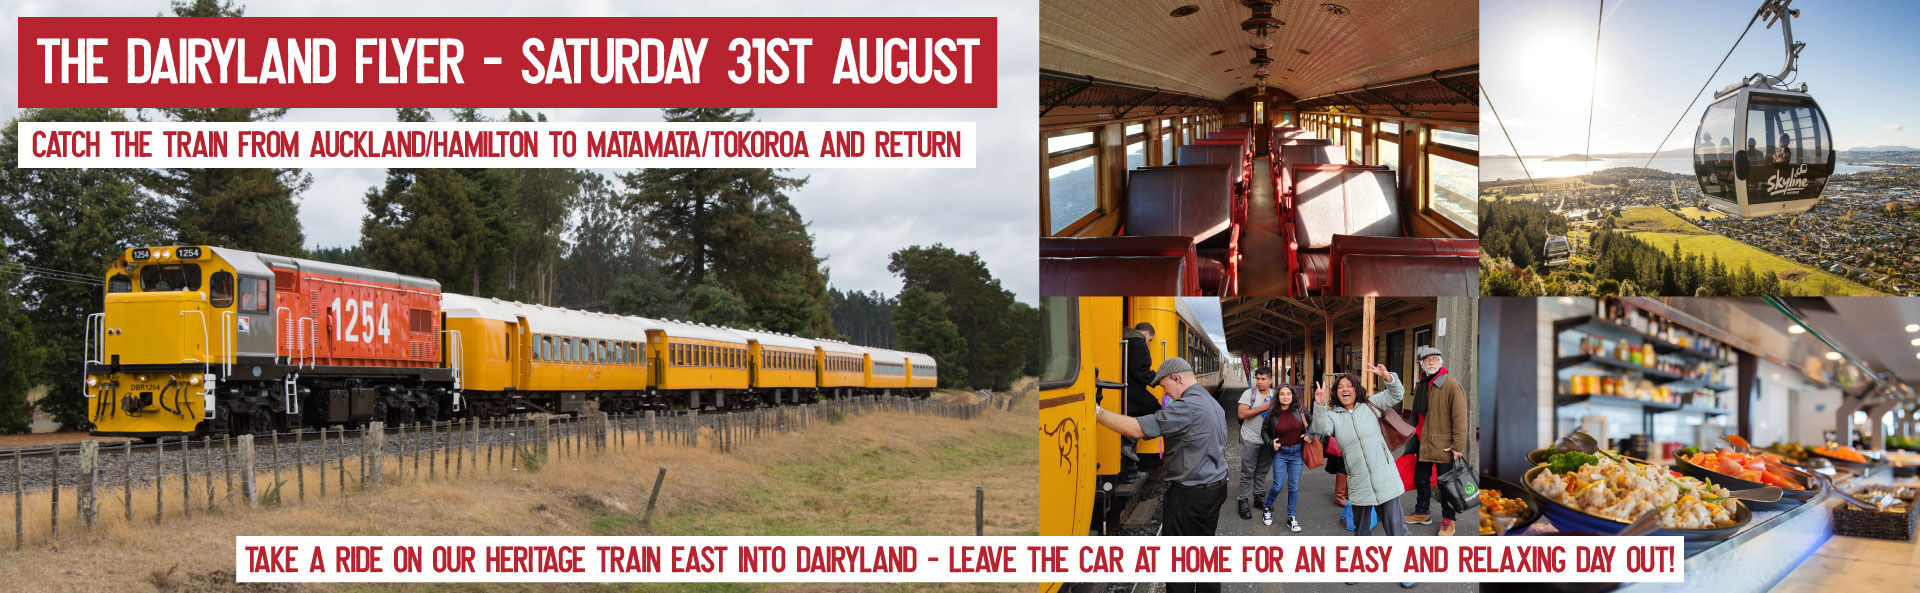 All aboard to explore the East Waikato by train! Experience a Skyline Gondola ride and buffet lunch with a view in Rotorua, or just a family day out aboard this special heritage train journey from Waiuku/Glenbrook/Hamilton.